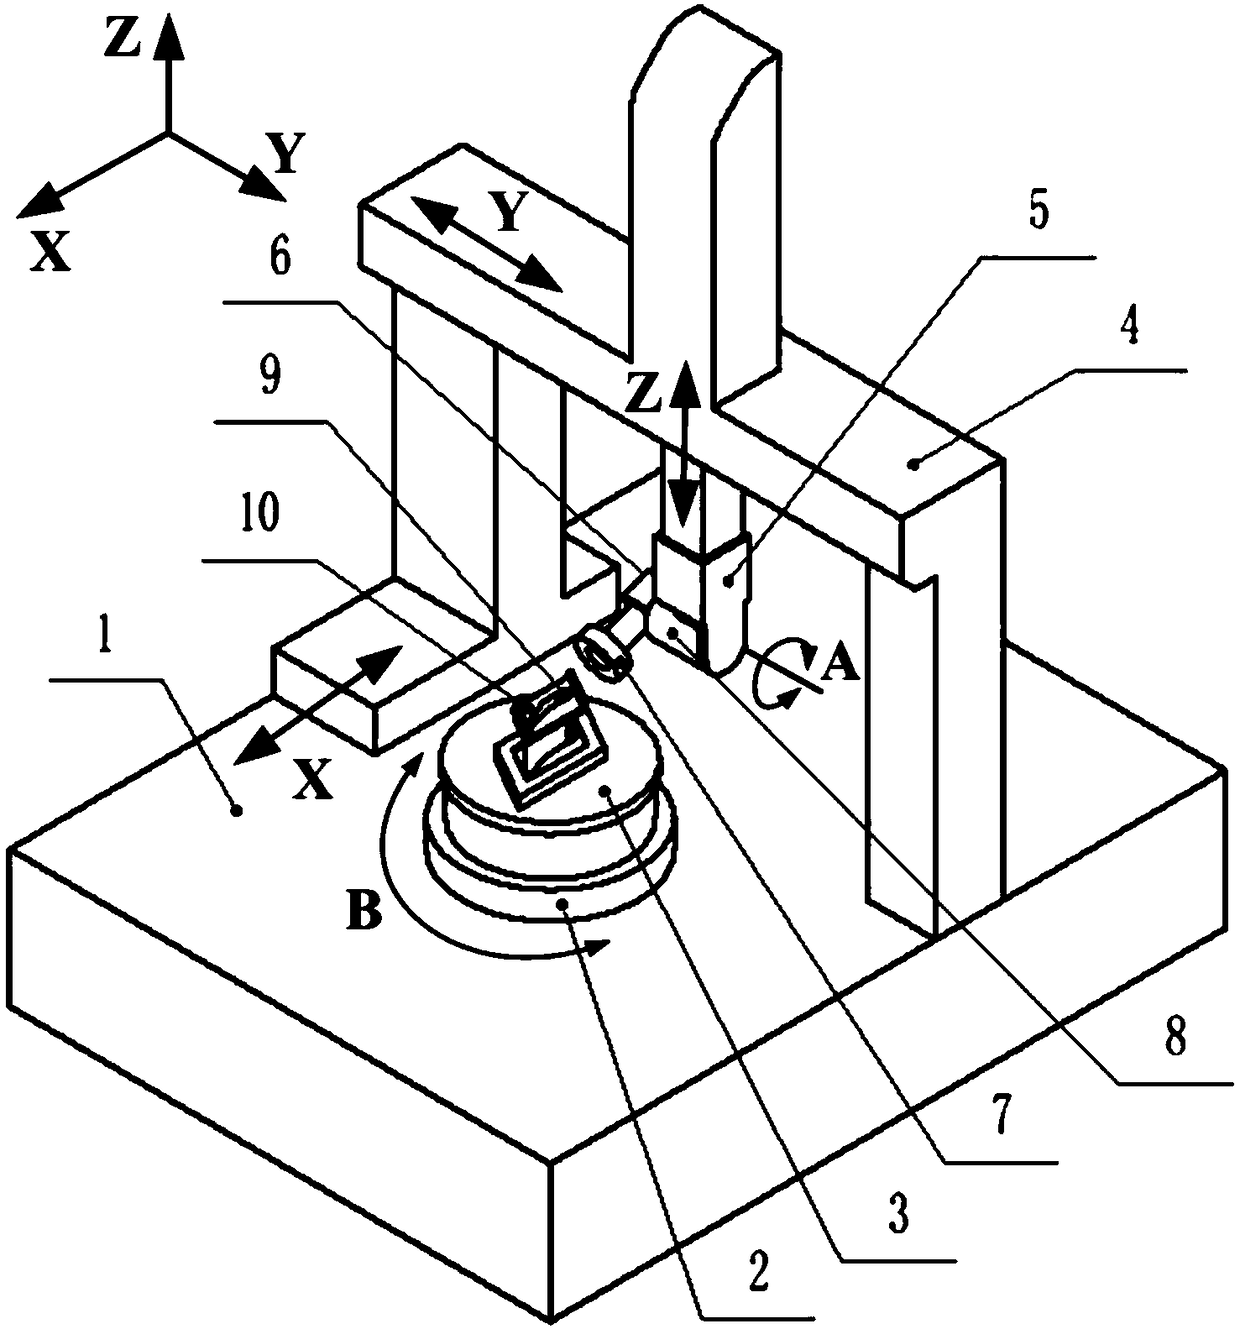 Five-shaft image measurement device used for measuring film hole shape and position parameters